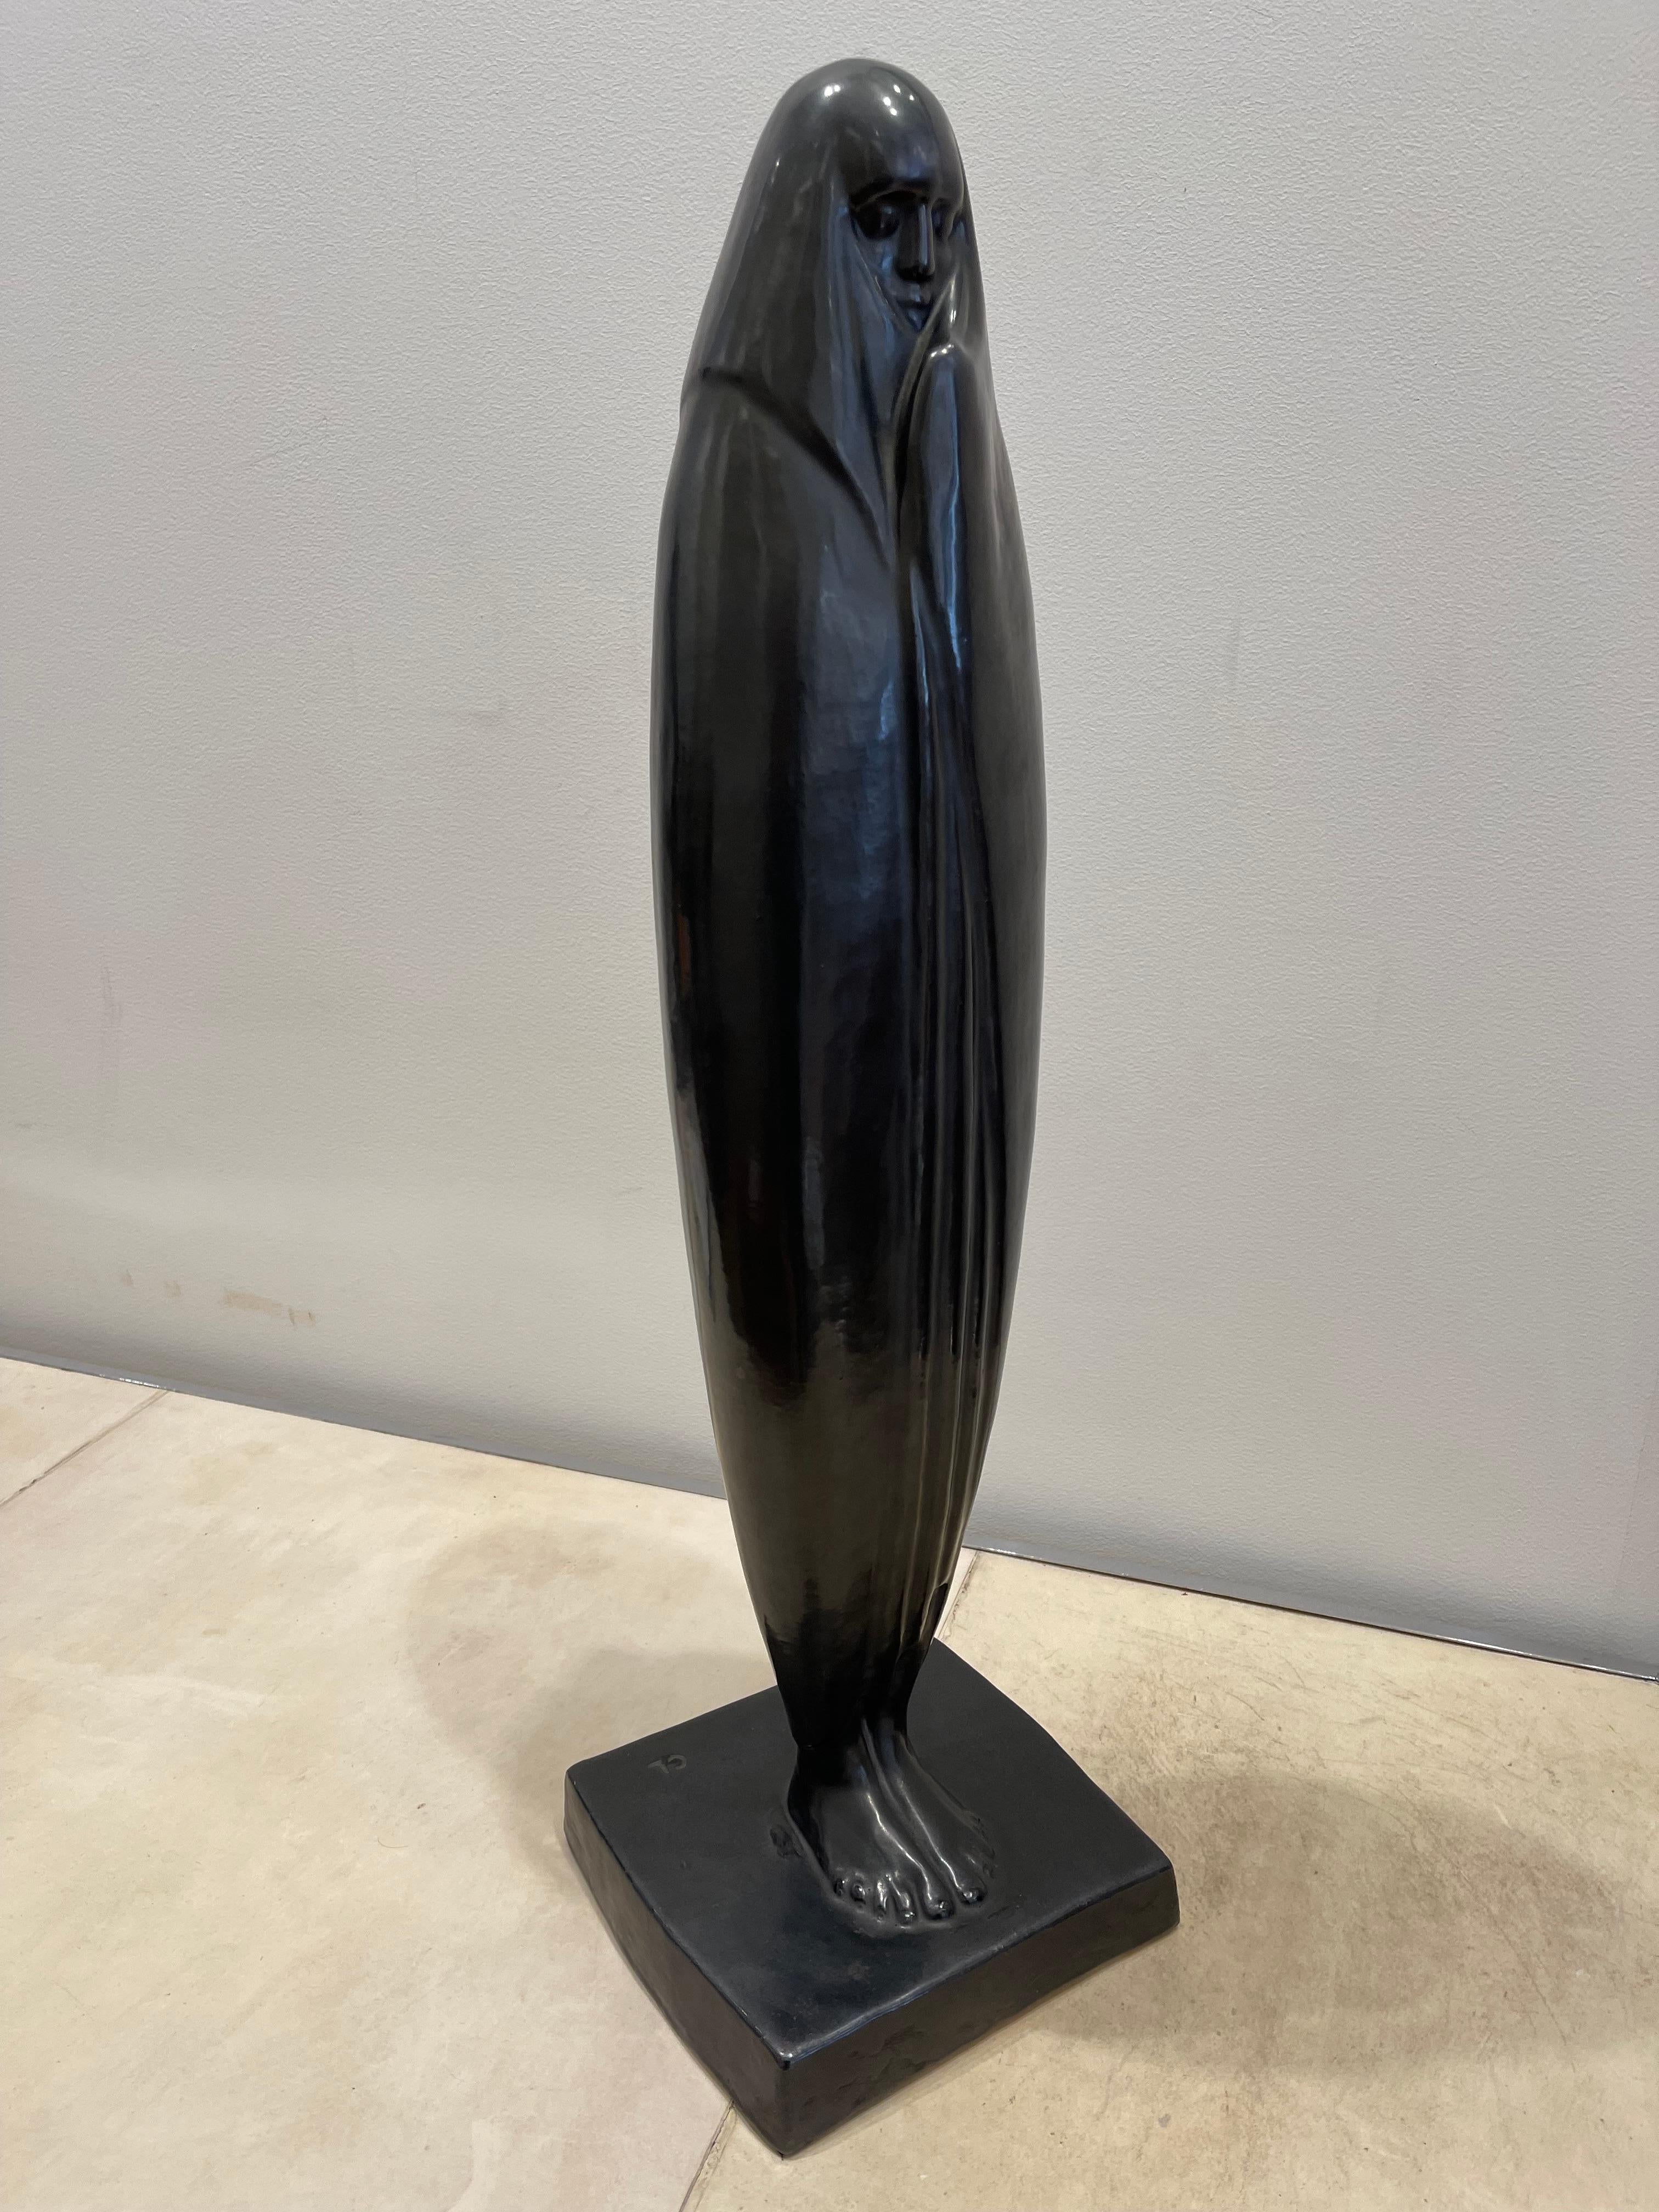 Superb 72cm high glazed ceramic by Céline Lepage (1882-1928) representing a veiled lady from Marrakech (Morocco) in the 1920s, French Art Deco period. It is made of terracotta with a grey anthracite and metallic patina. Very good condition. CL